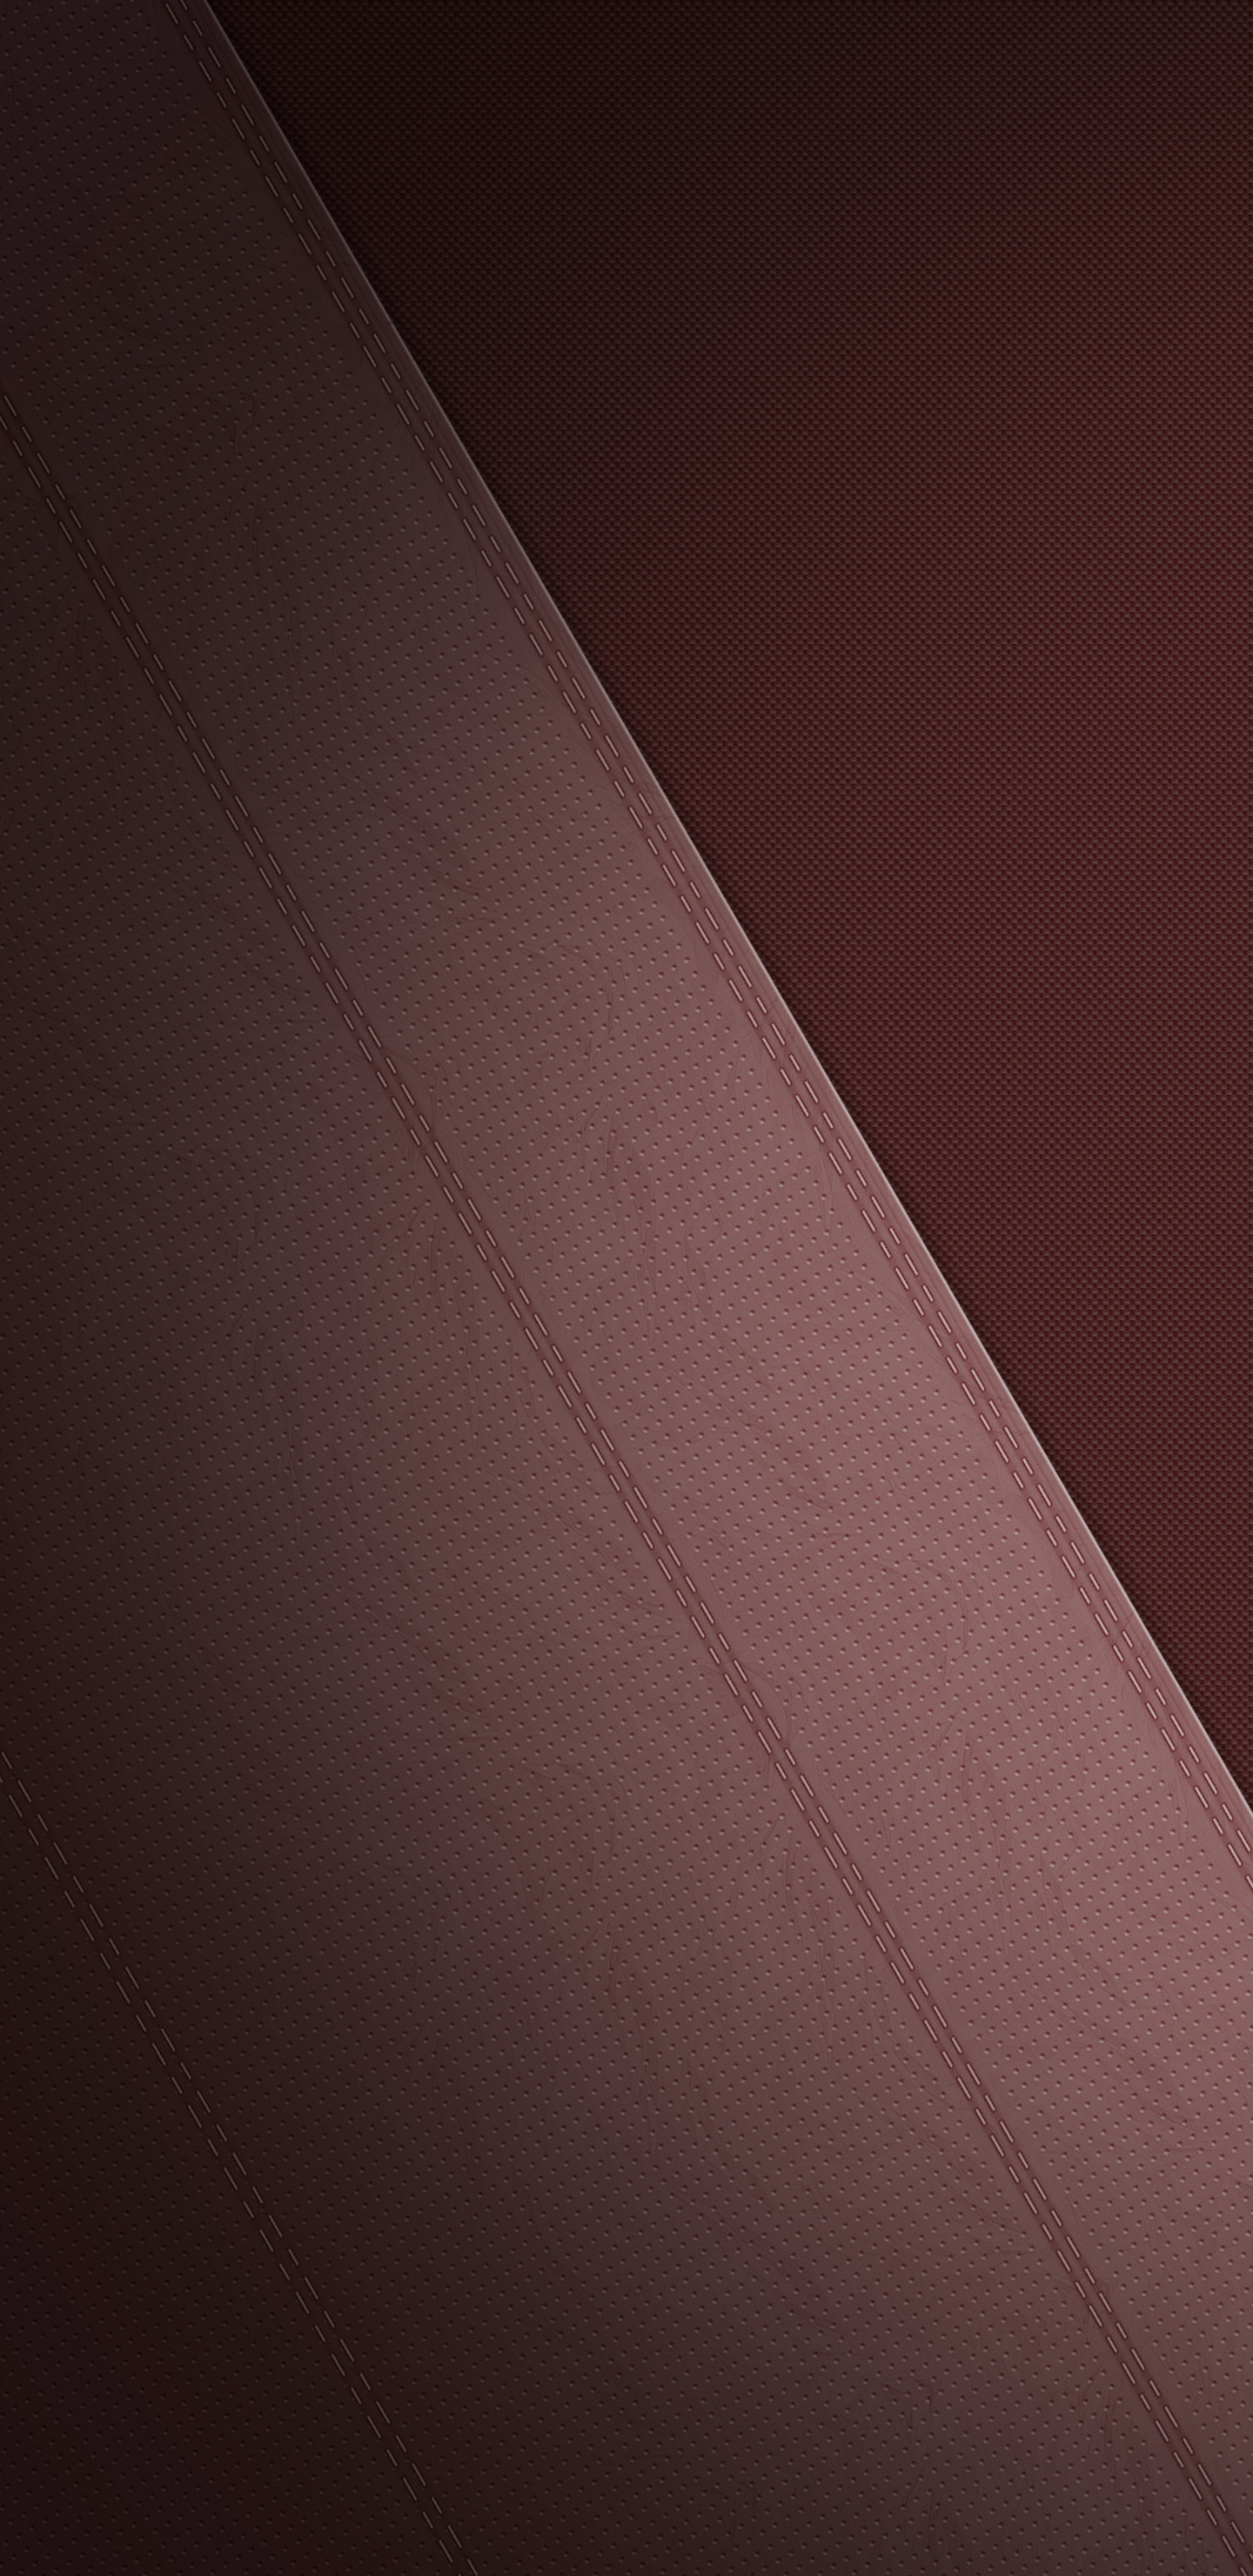 1440x2960 Leather Texture Brown 4k Samsung Galaxy Note 9,8, S9,S8,S8+ QHD  HD 4k Wallpapers, Images, Backgrounds, Photos and Pictures